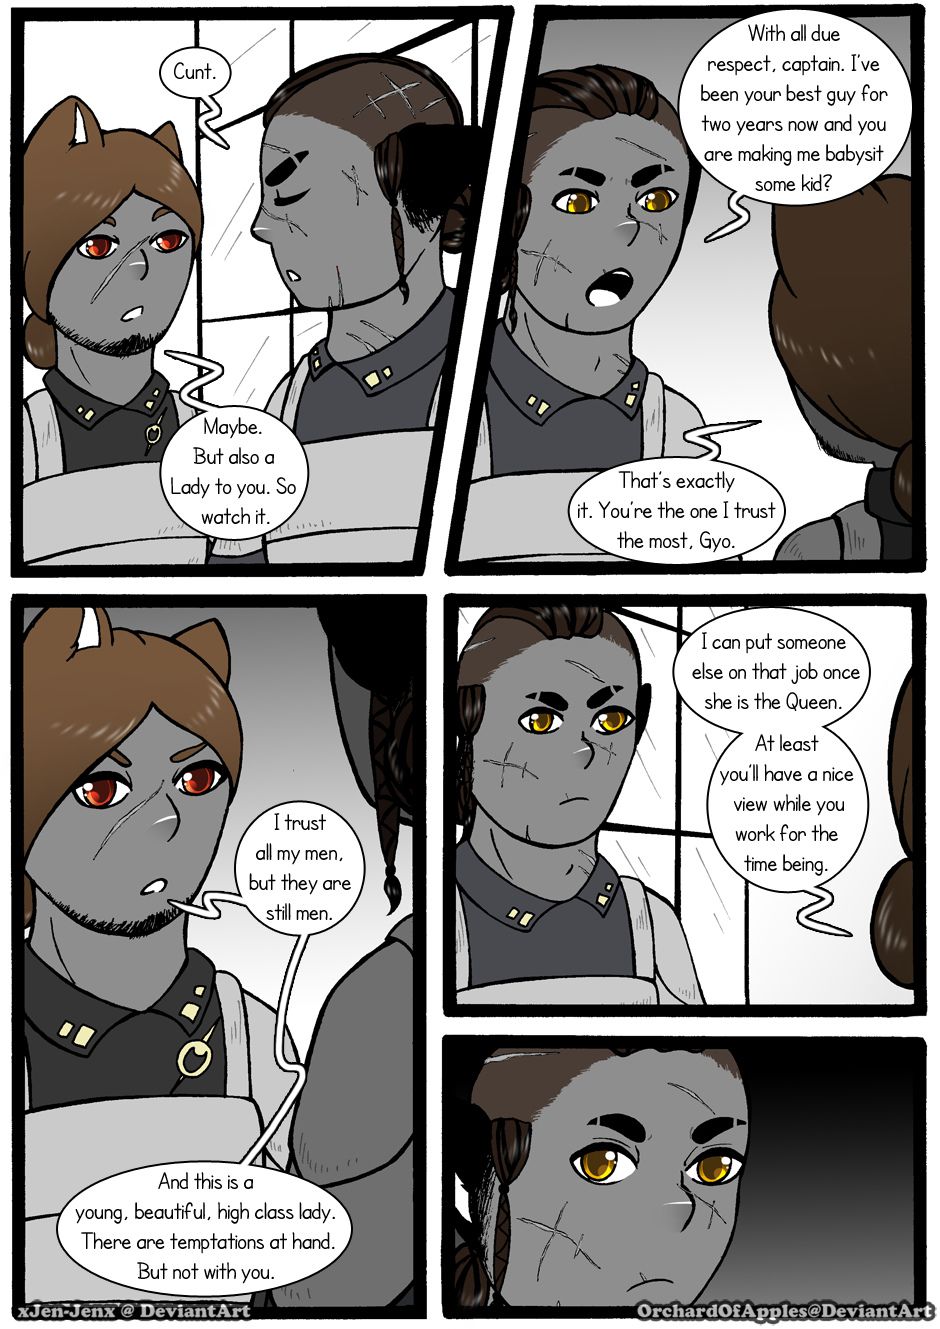 [Jeny-jen94] Between Kings and Queens [Ongoing] 123